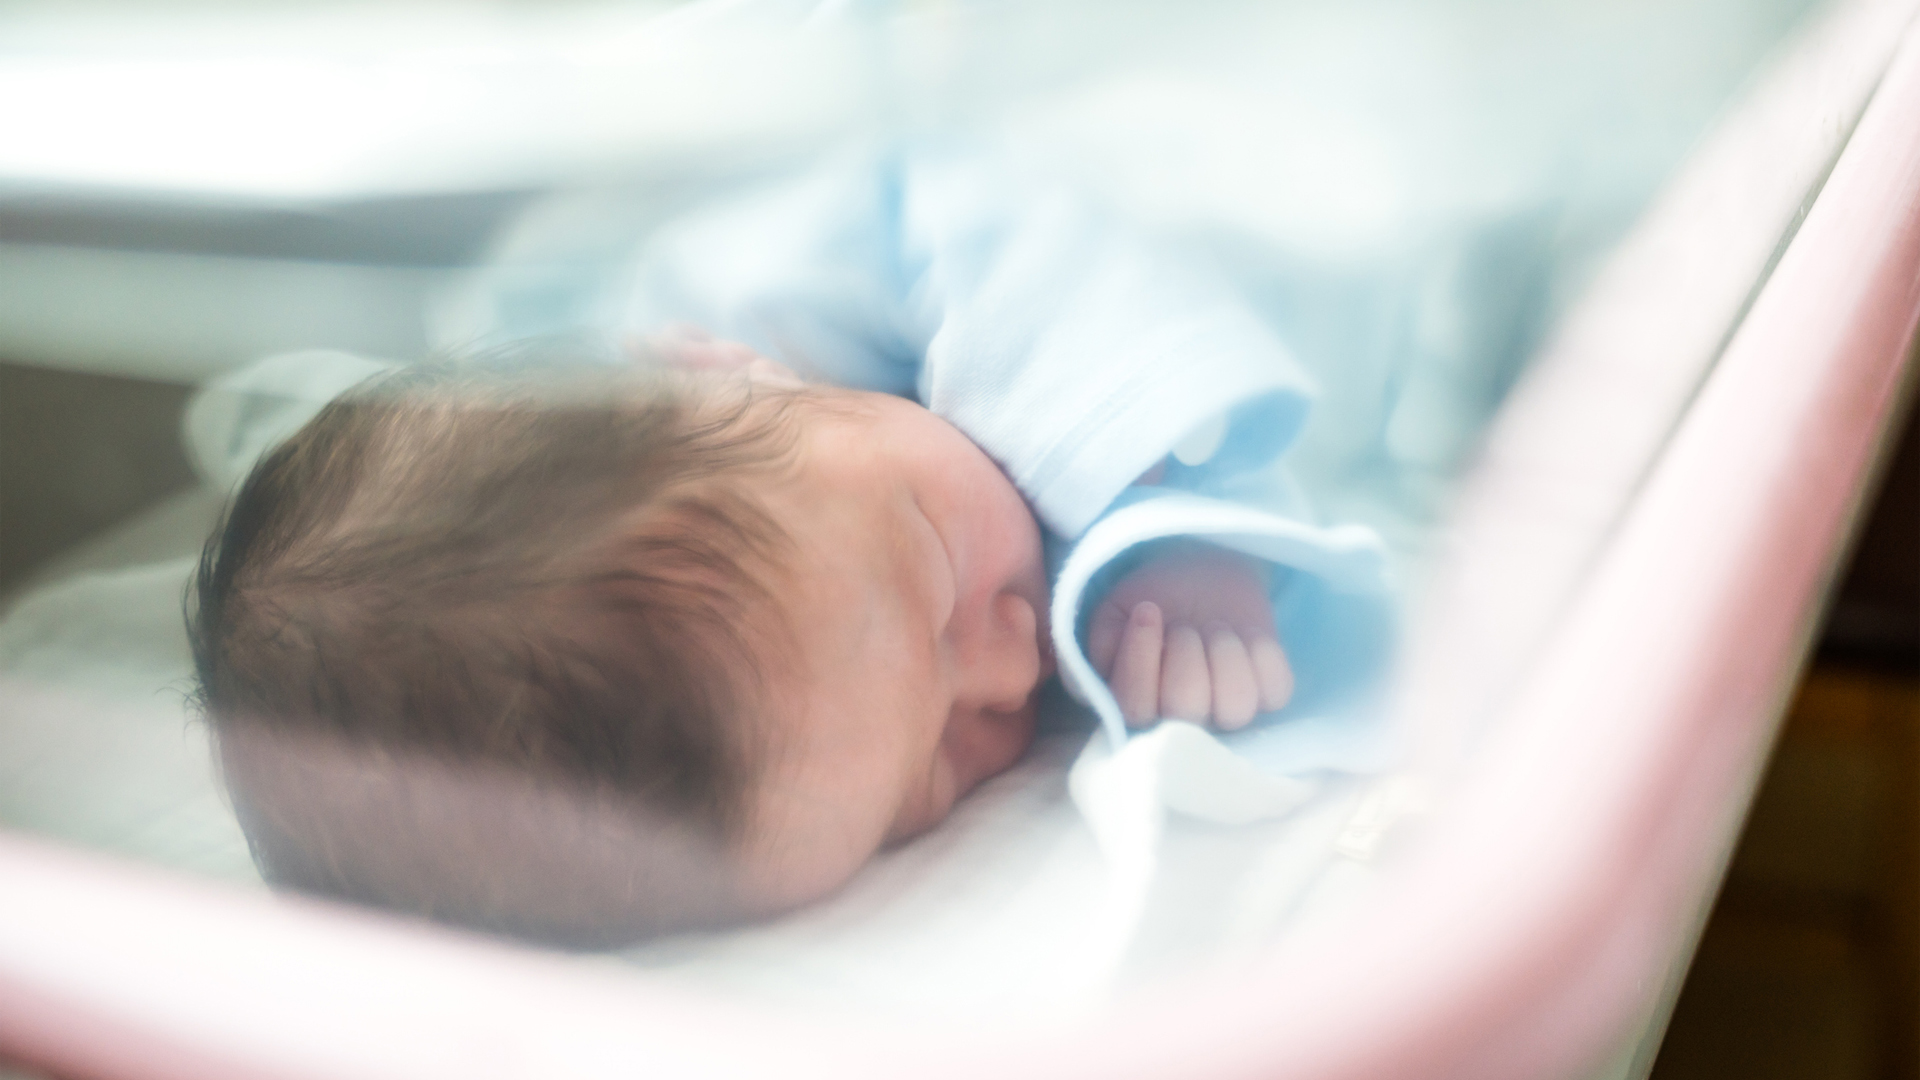 Research shows delaying umbilical cord clamping saves babies’ lives